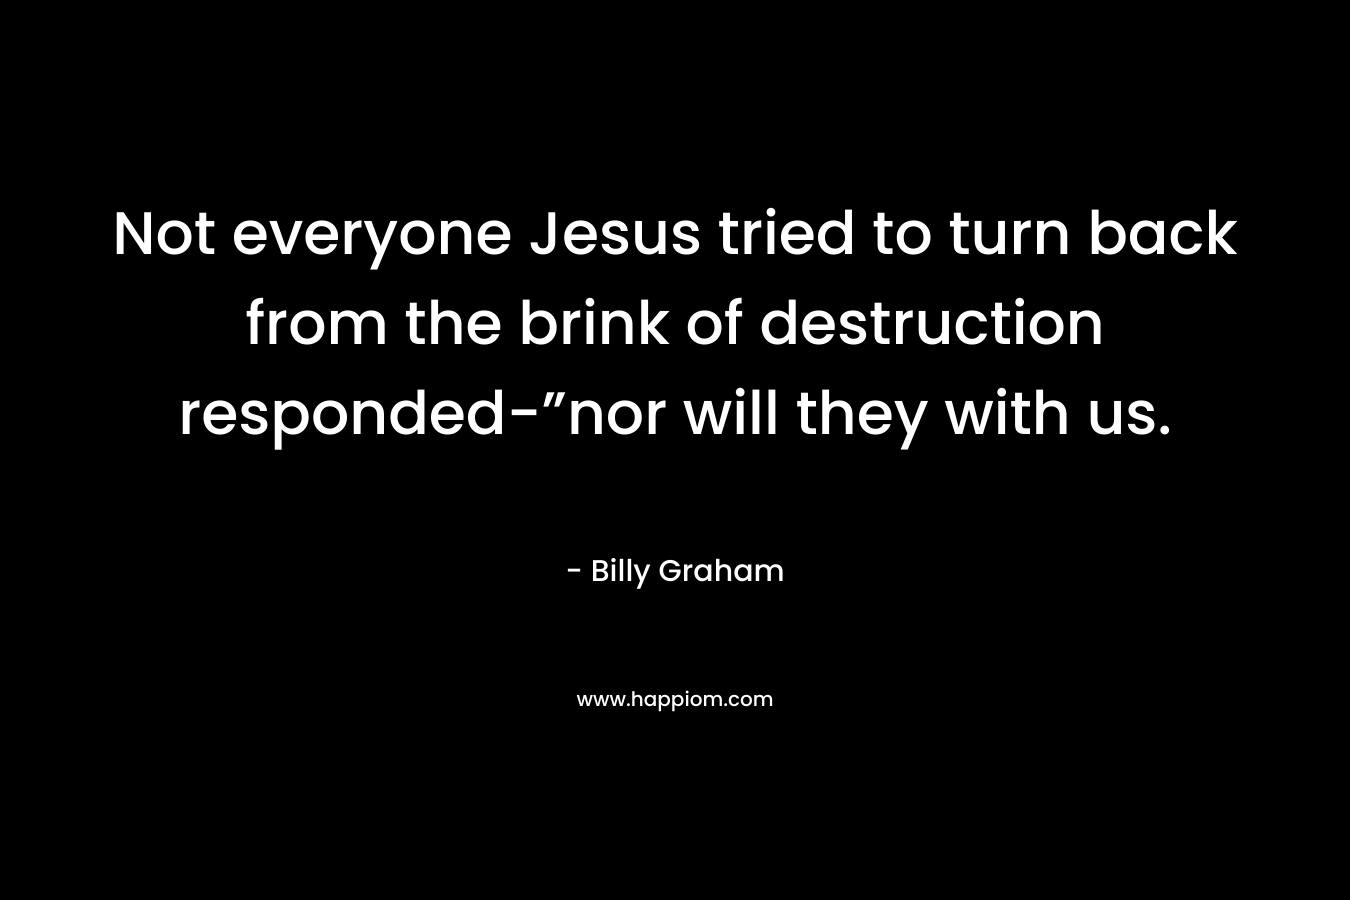 Not everyone Jesus tried to turn back from the brink of destruction responded-”nor will they with us.